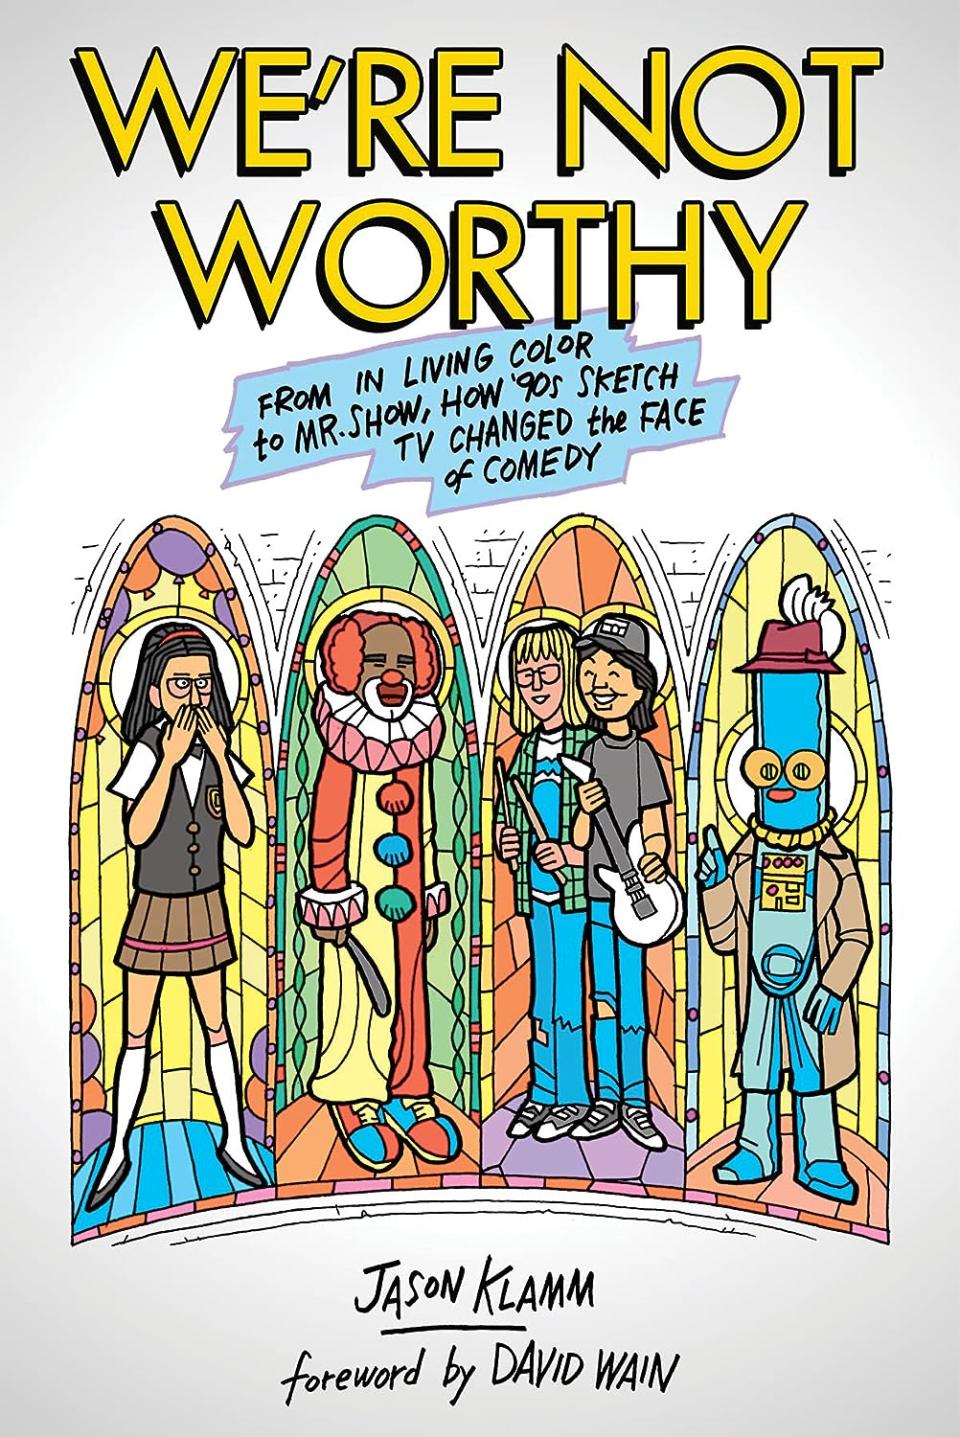 "We're Not Worthy" arrived Sept. 12.